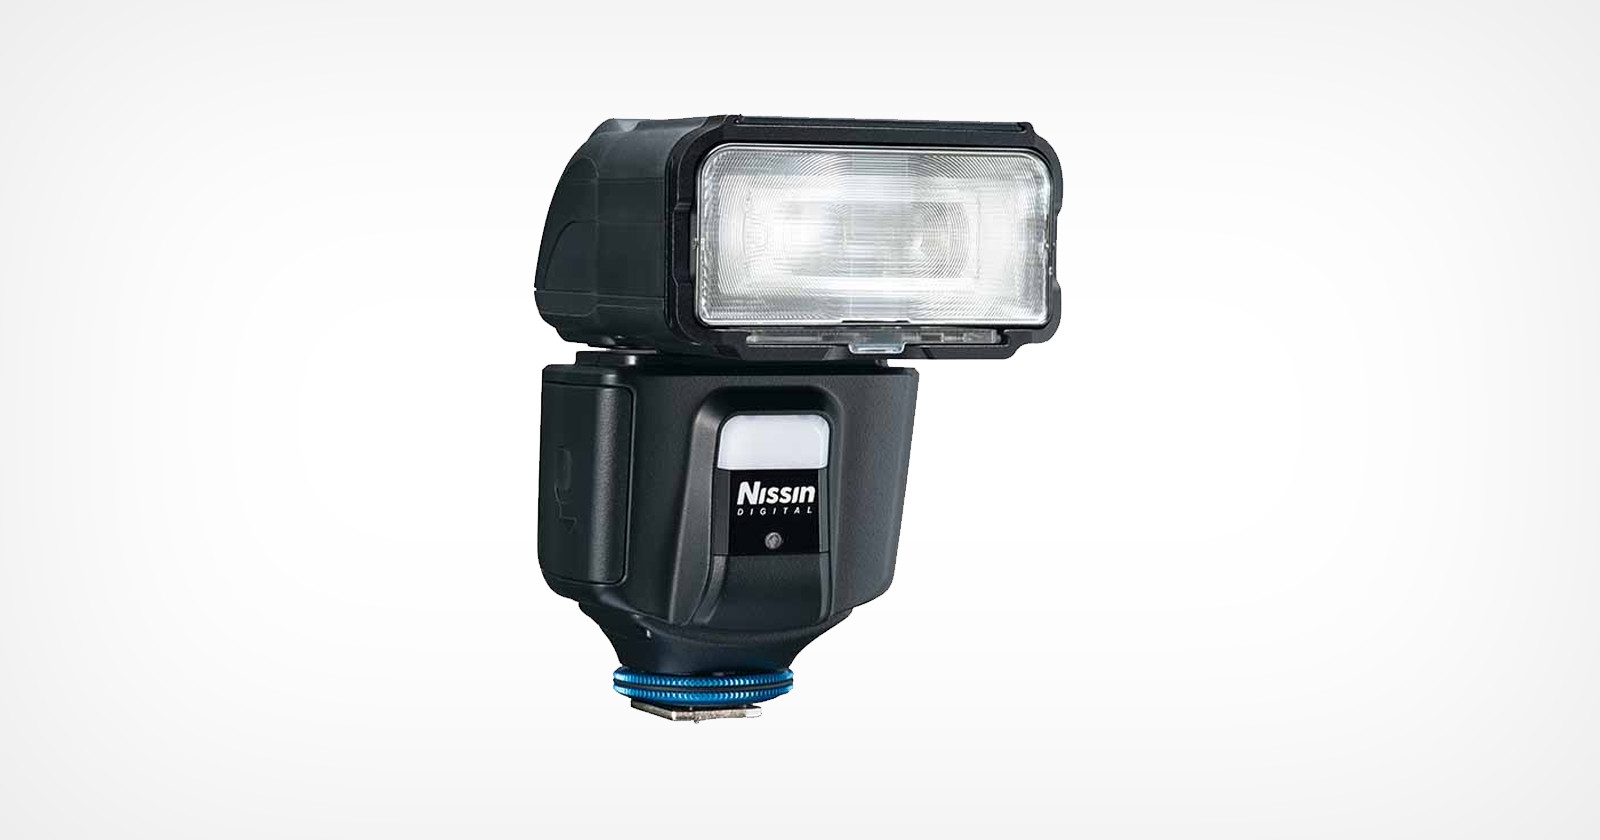 Nissin’s New Nikon Strobe Shows High Flash Prices Are Here to Stay